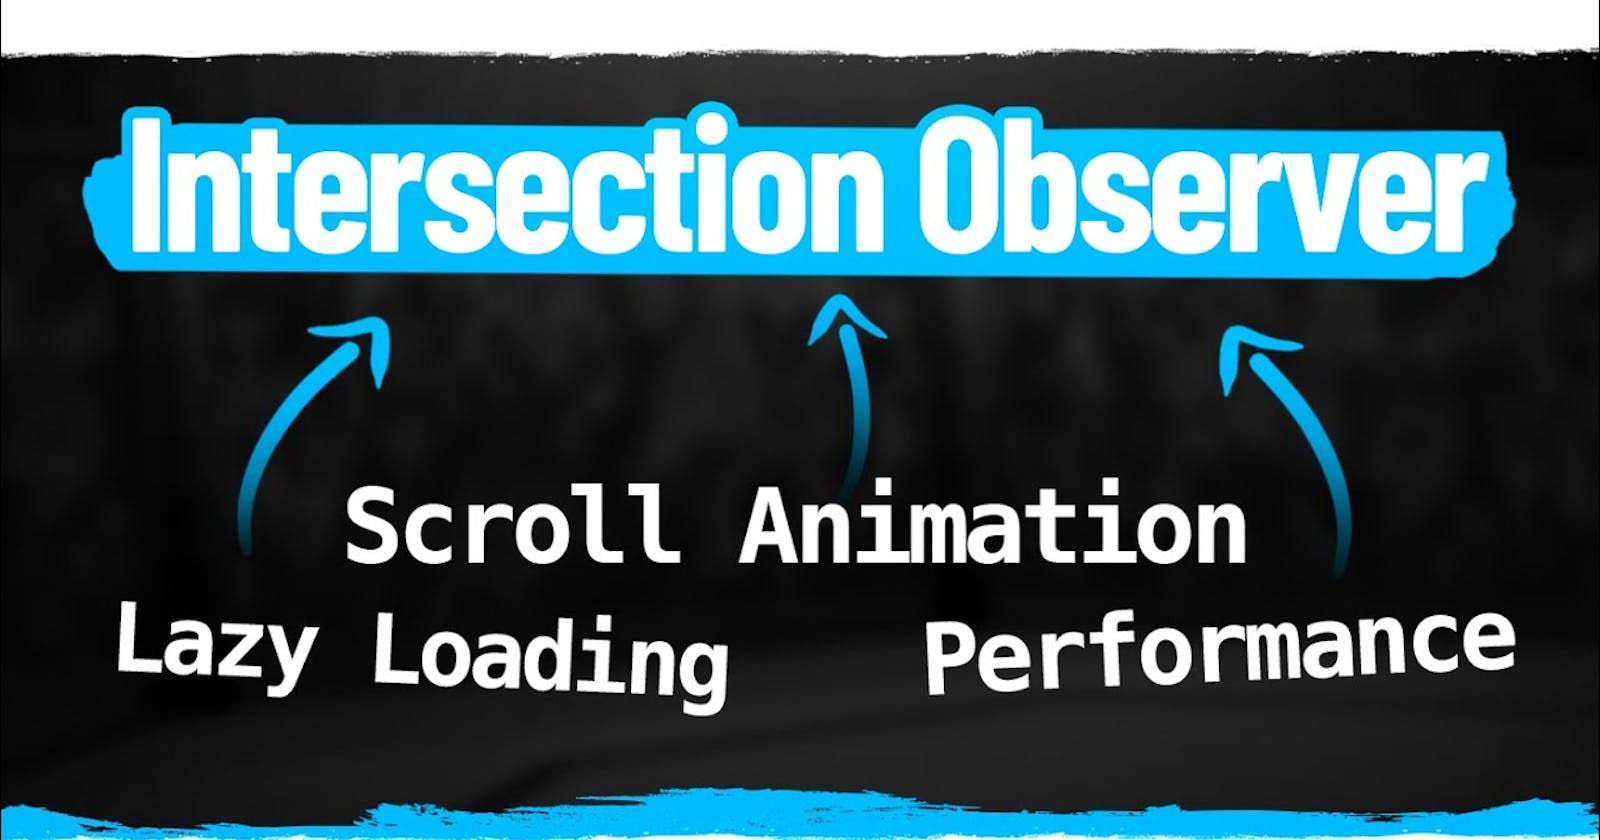 How to use Intersection Observer